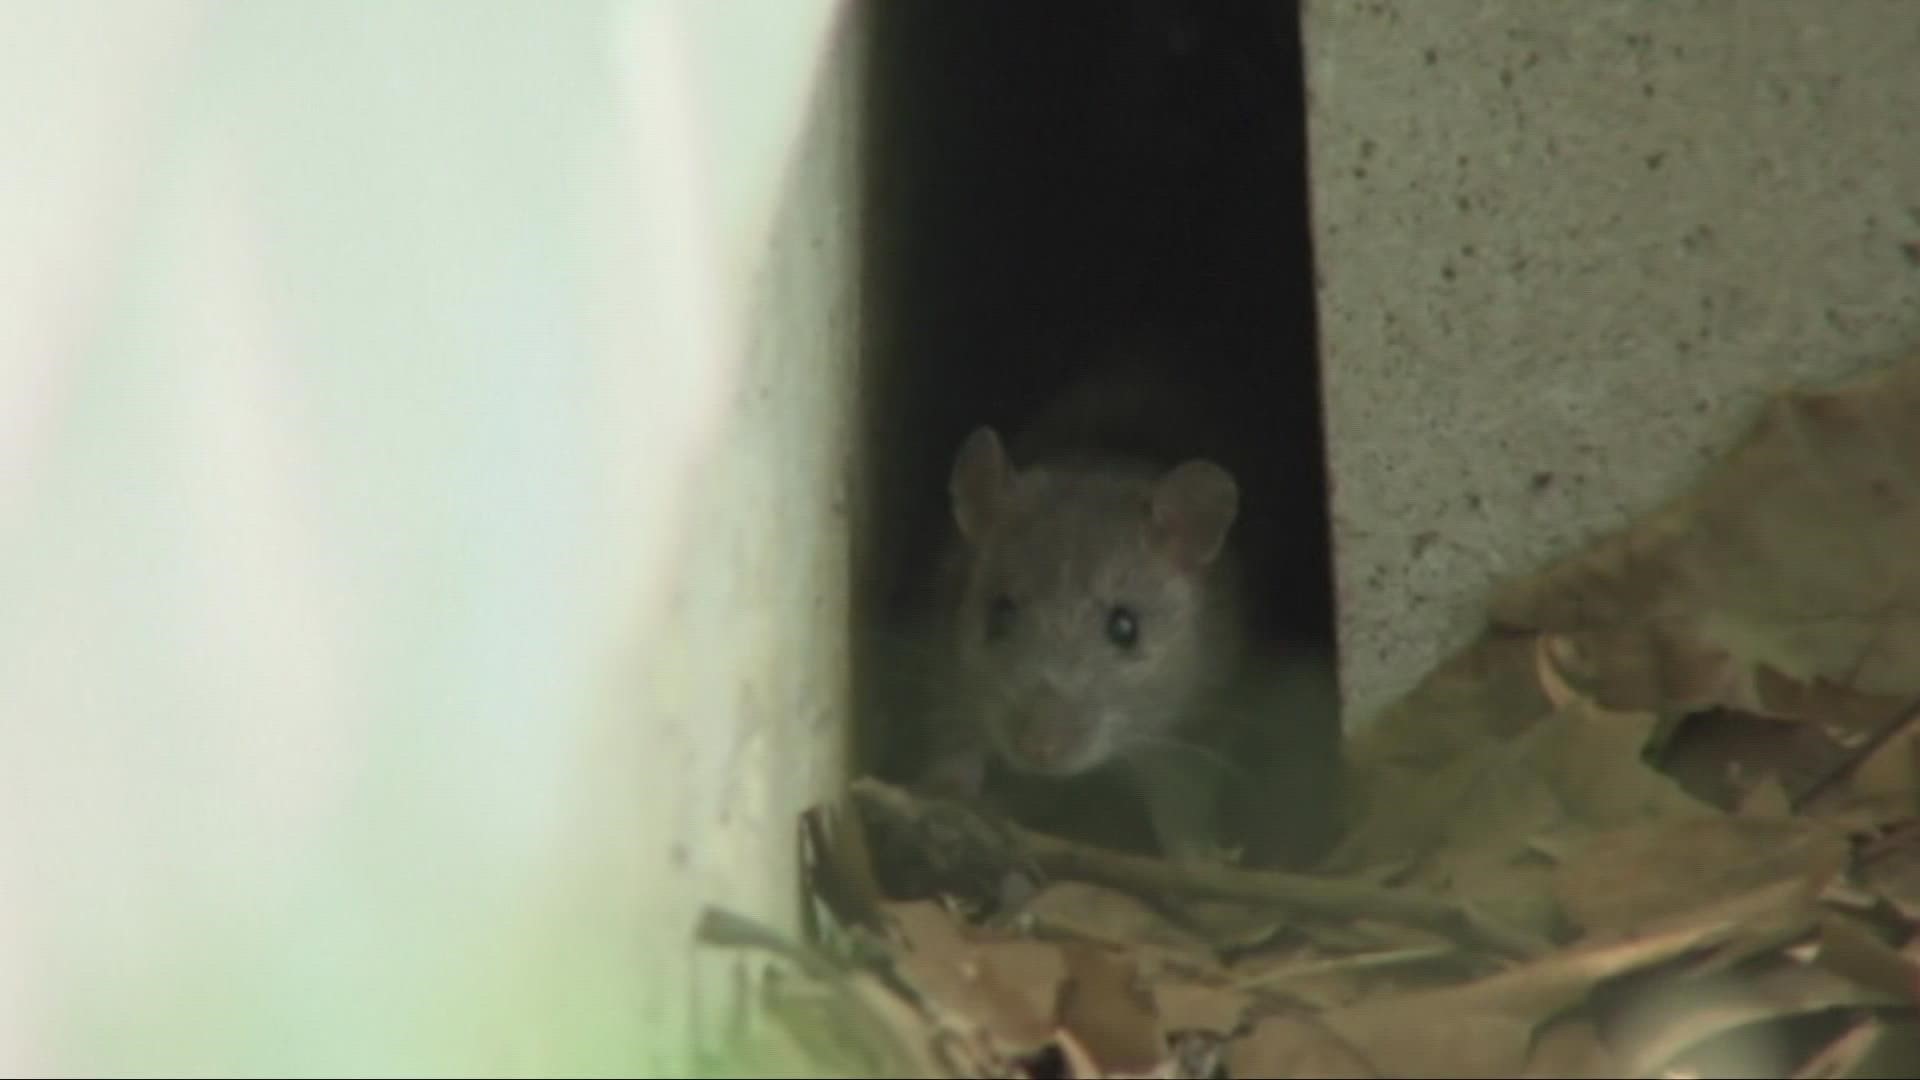 The Cleveland Department of Public Health says it is doing double the work than in years past just to keep the rats under control.